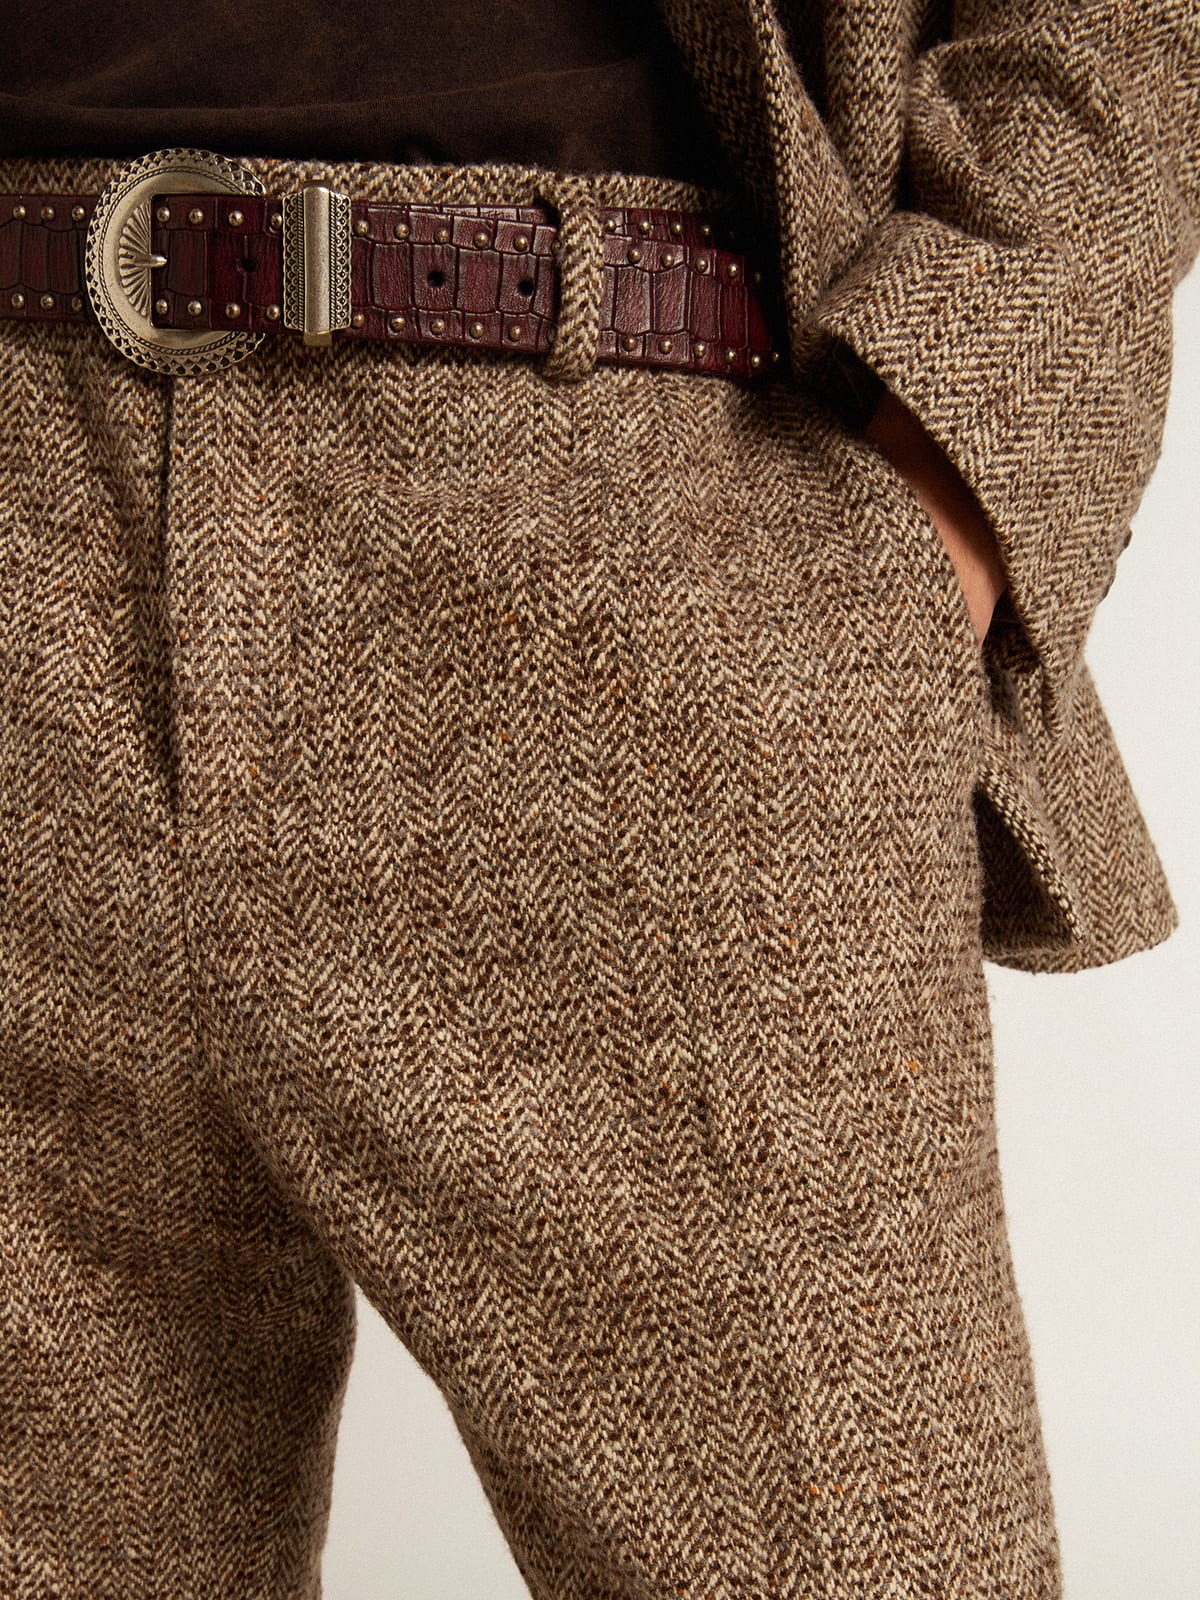 Men’s pants in beige and brown wool and silk blend fabric